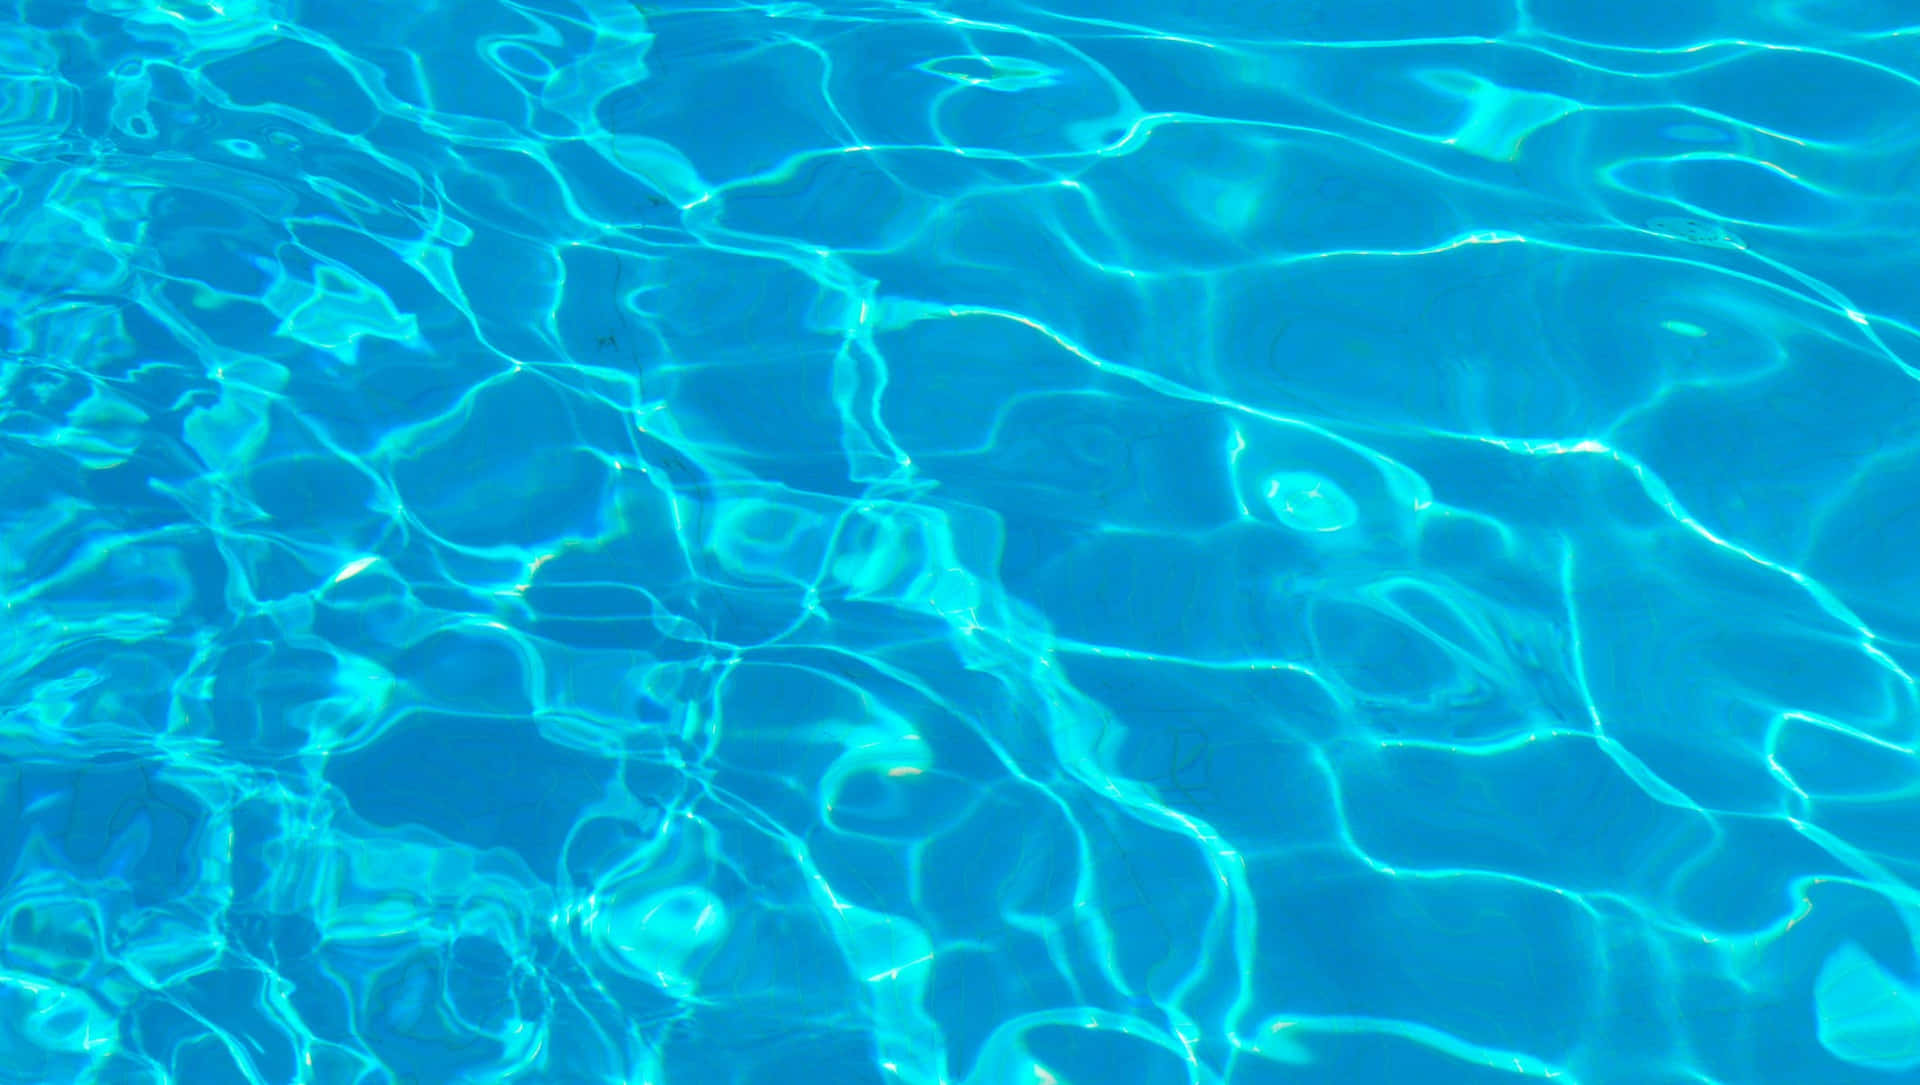 A Close Up Of A Blue Swimming Pool